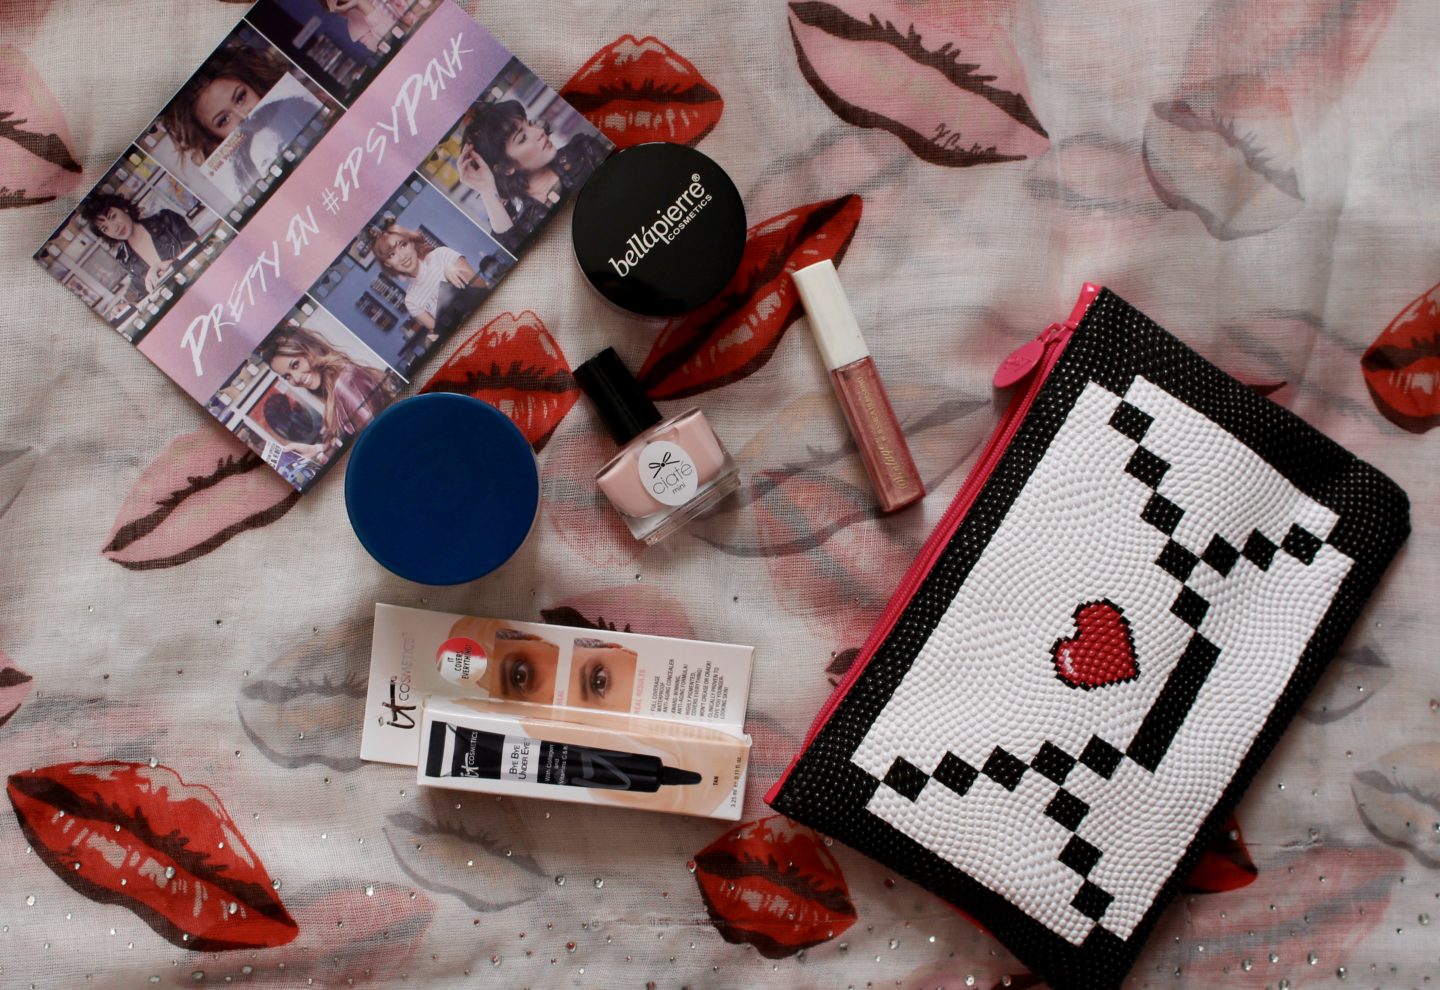 Ipsy Review #8: “Pretty in #IpsyPink” February Glam Bag